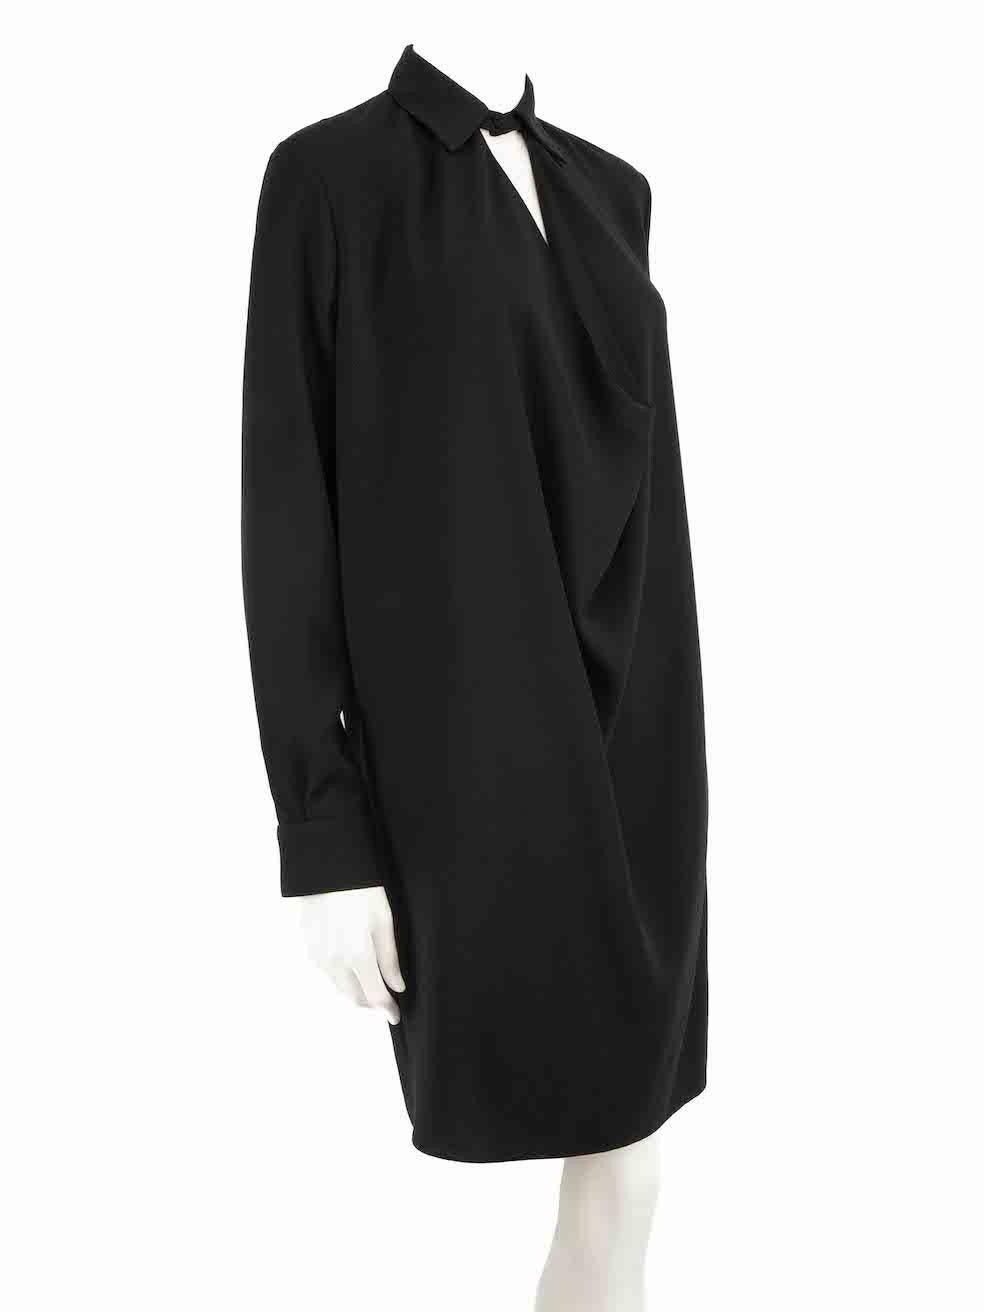 CONDITION is Very good. Hardly any visible wear to dress is evident on this used Balenciaga designer resale item.
 
 
 
 Details
 
 
 Black
 
 Polyester
 
 Knee length dress
 
 Cowl neckline
 
 Collared
 
 Front button closure
 
 Buttoned cuffs
 
 
